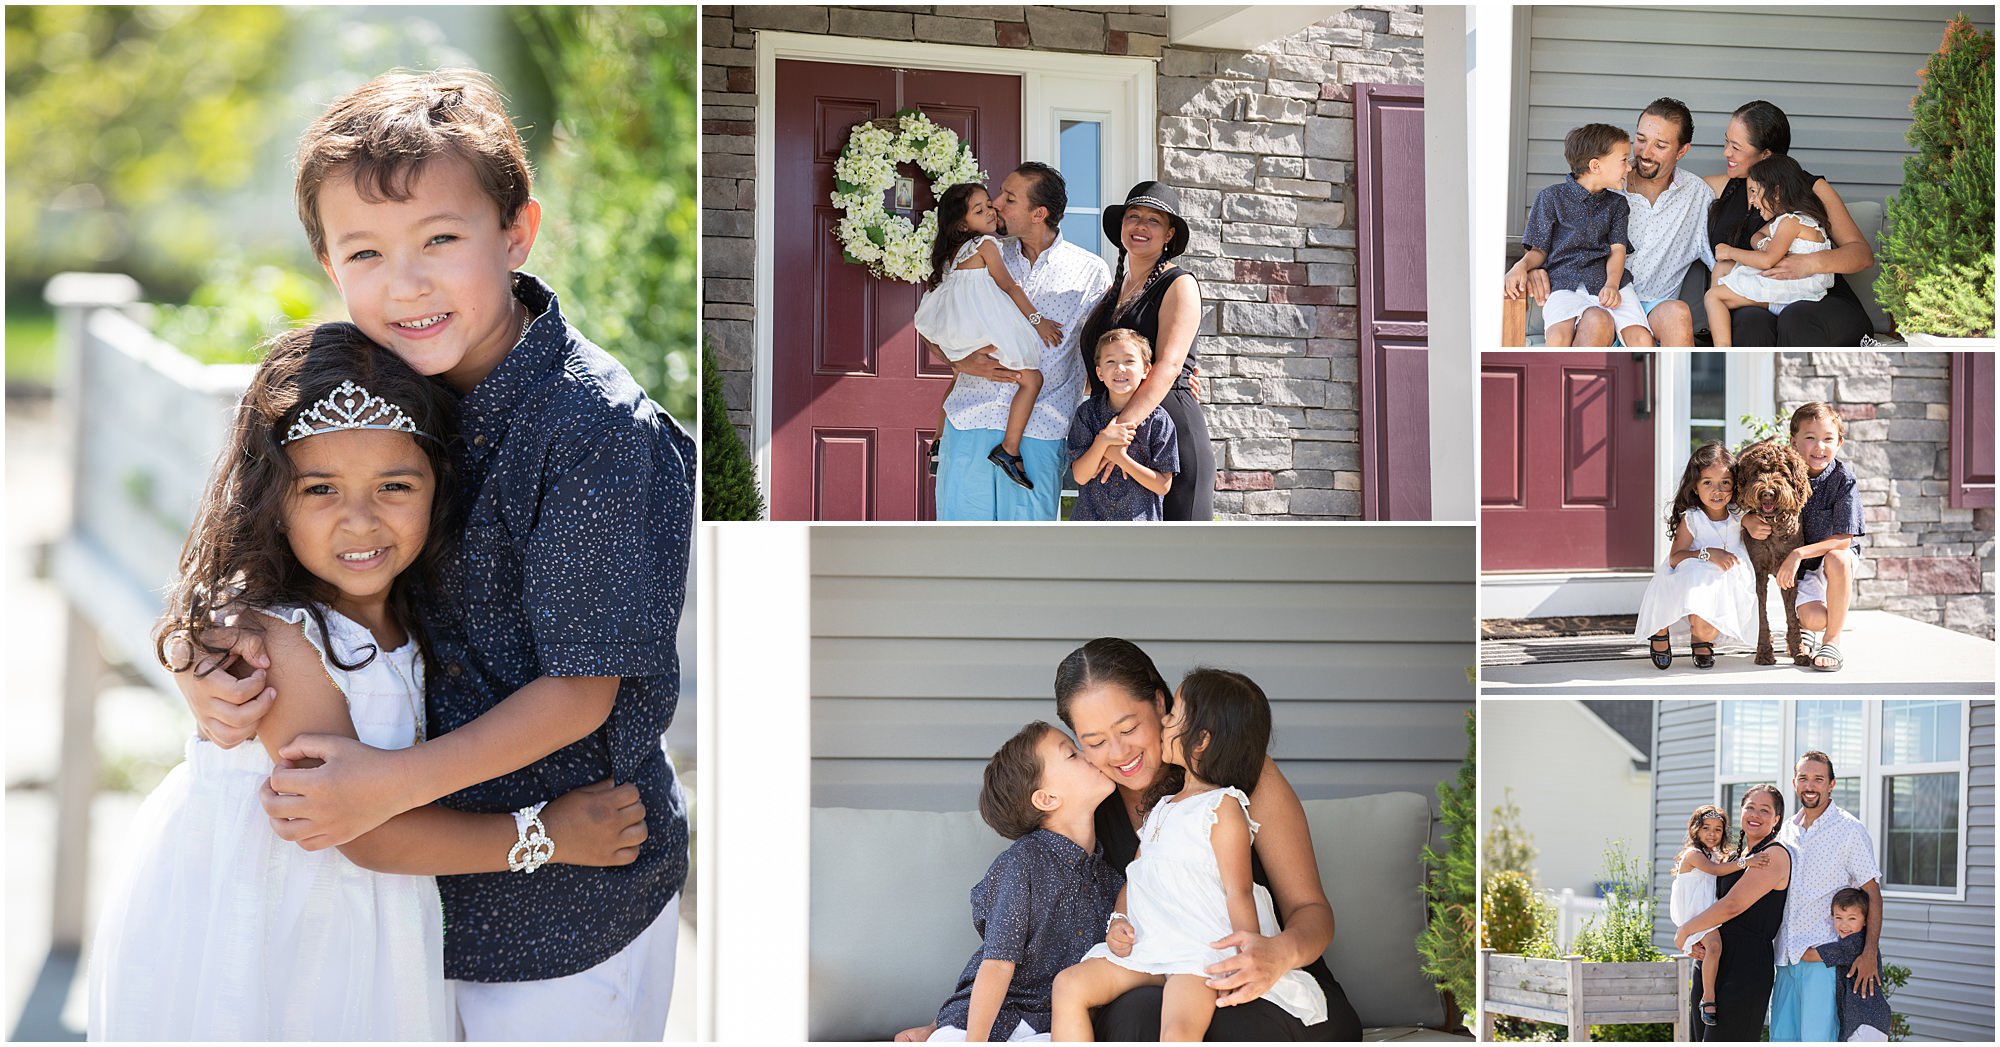 Moorestown Family Photographer captures families on their front porches during COVID-19 pandemic